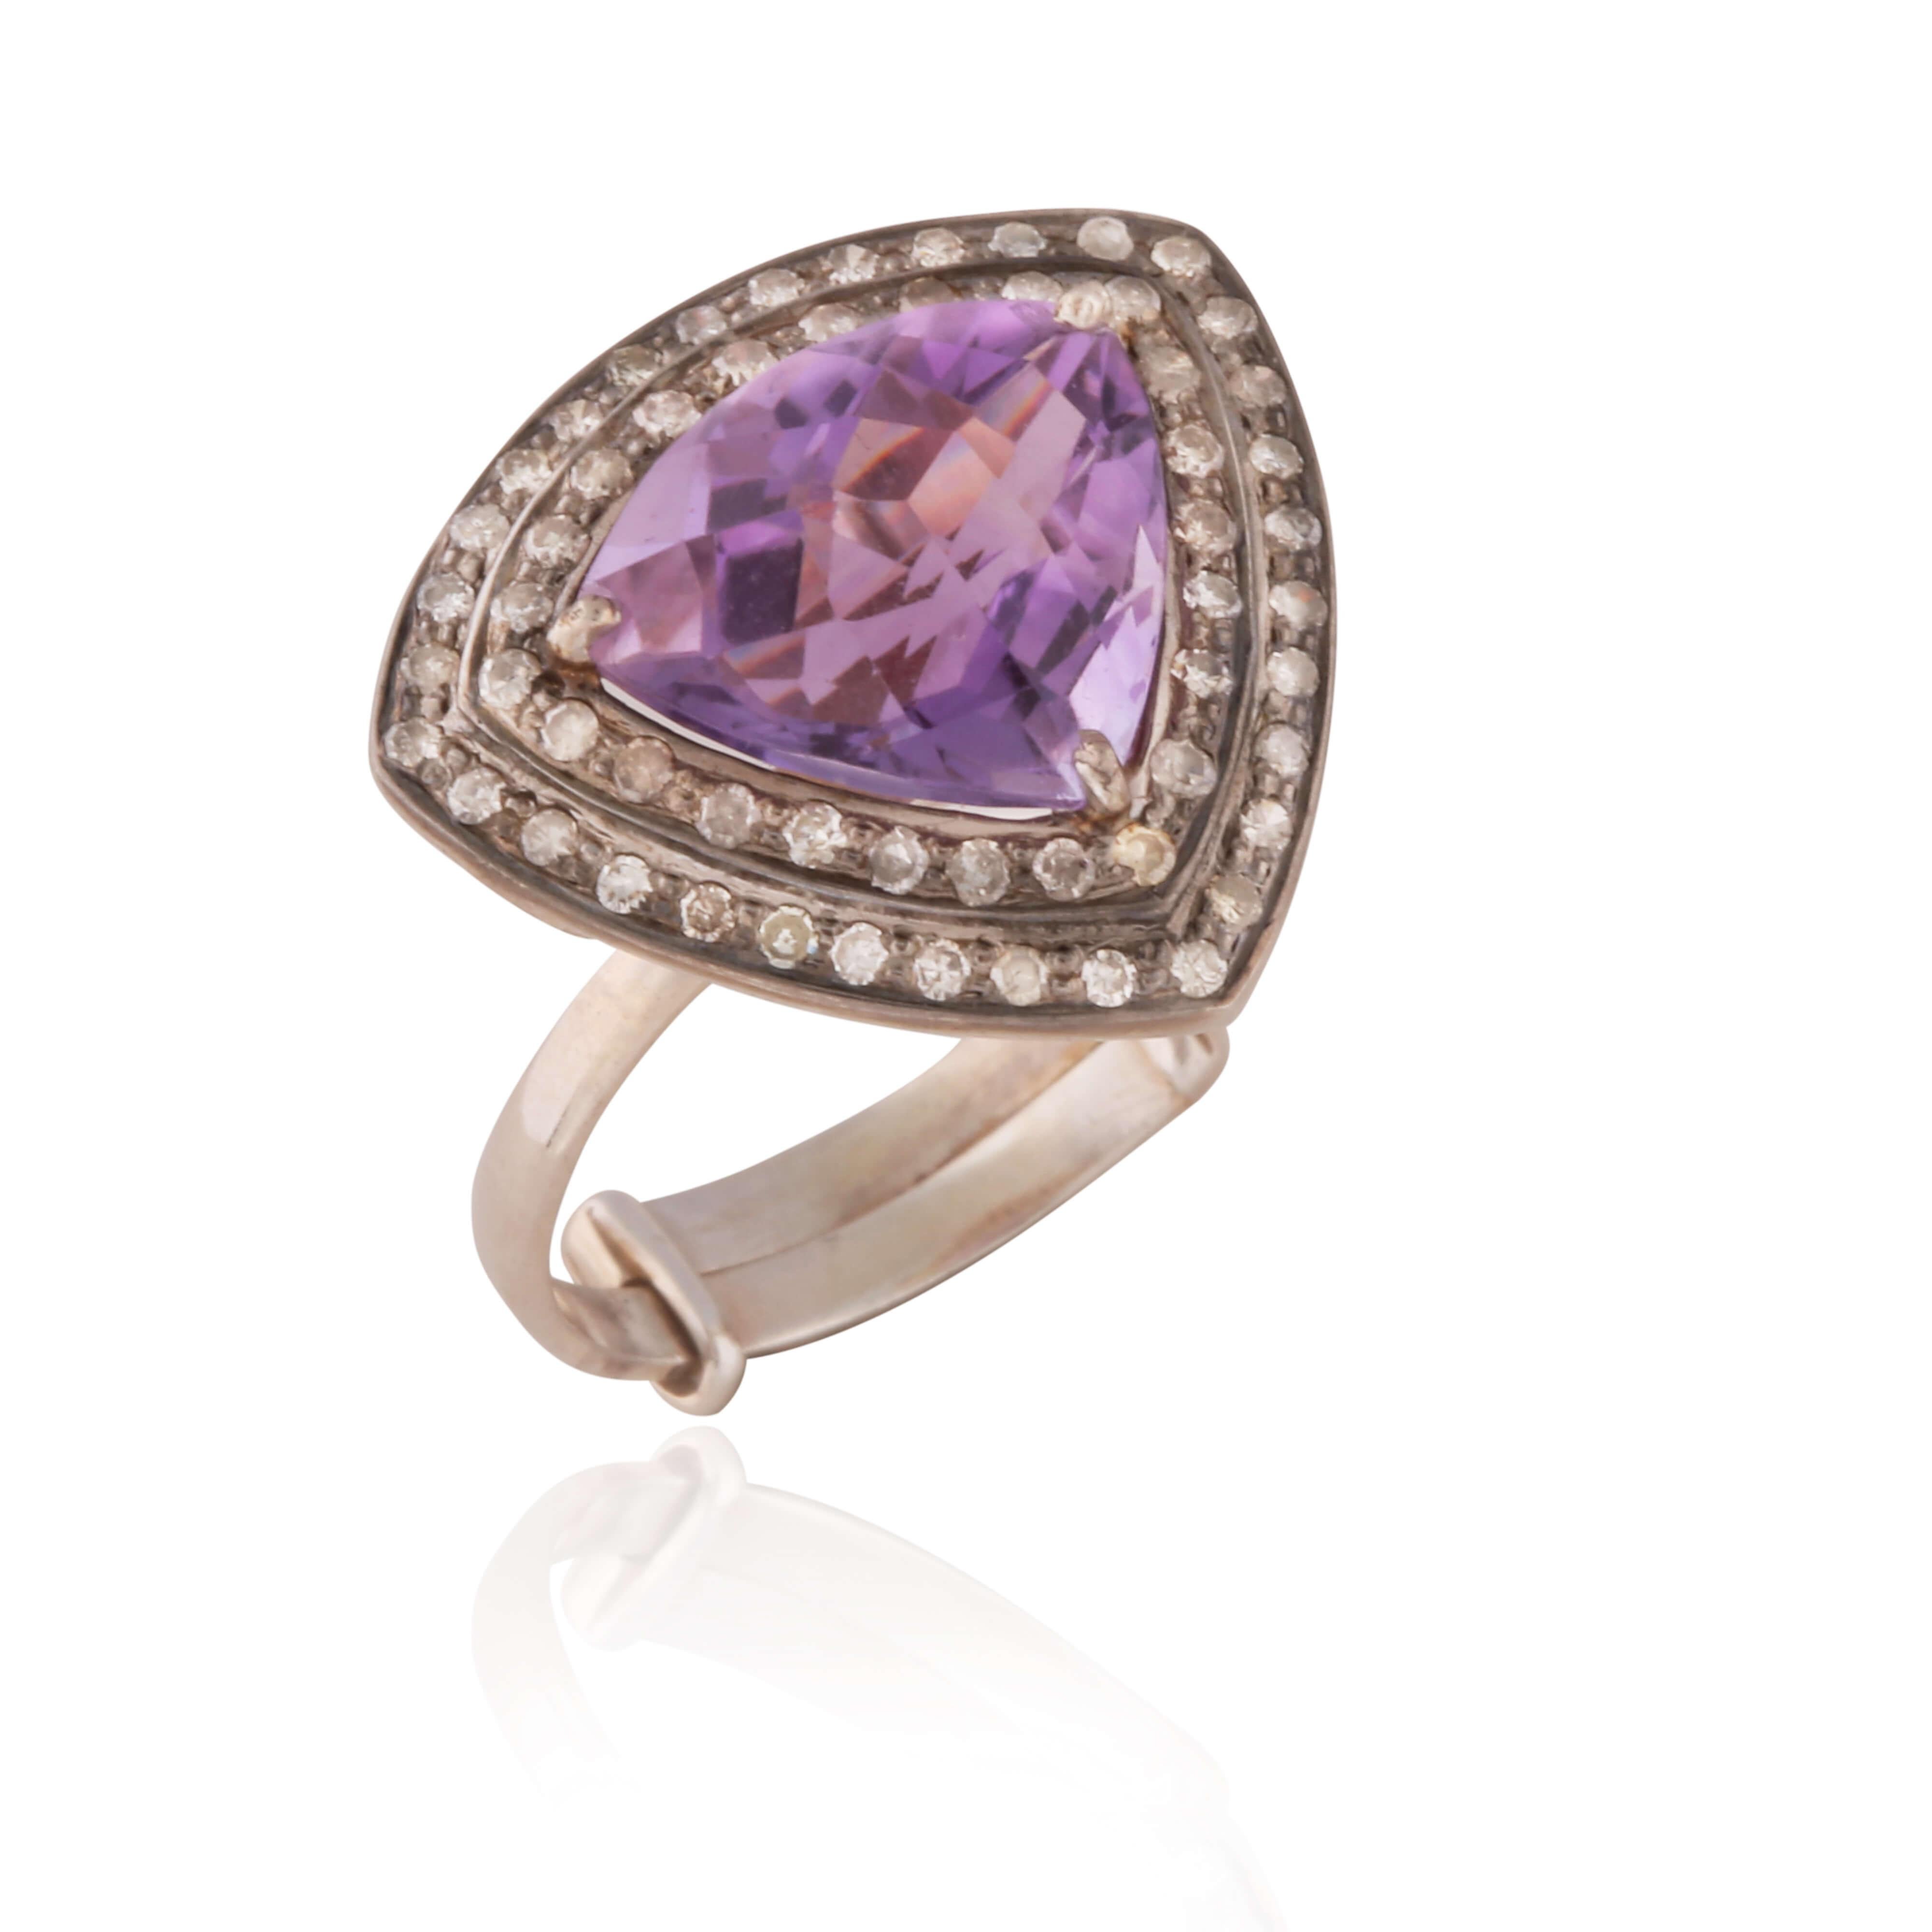 A really pretty ADJUSTABLE ring with a stunning carve Blue Topaz stone surrounded by a diamond border.

It is adjustable so can fit a range of finger sizes.

4.86 carat of purple amethyst and 0.44 carat of diamonds.

Set on silver.

Comes with a